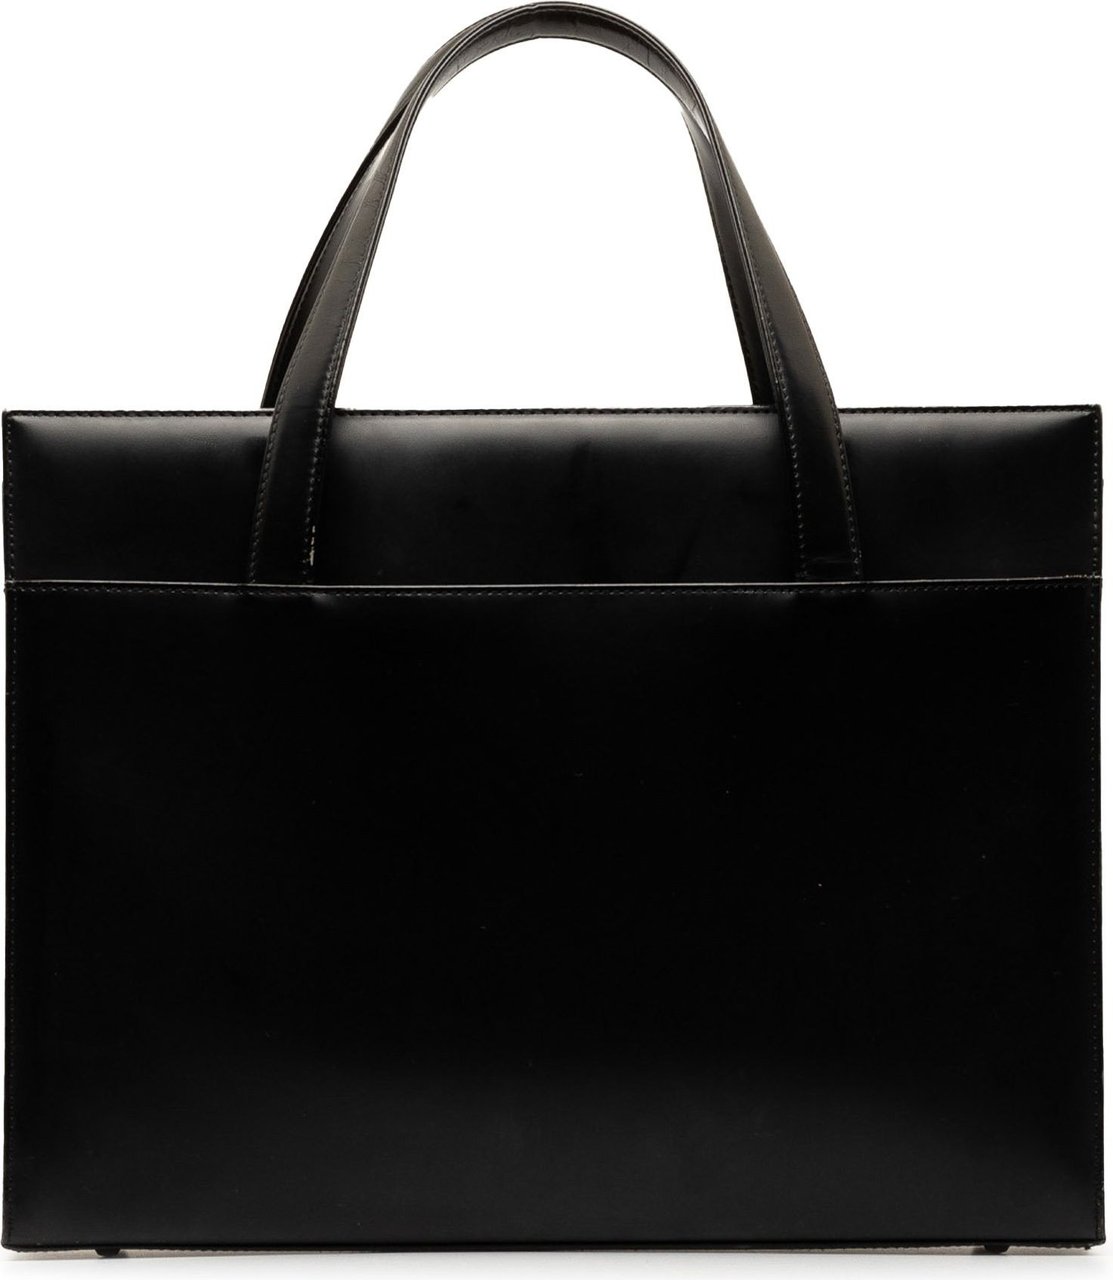 Burberry Leather Tote Bag Zwart